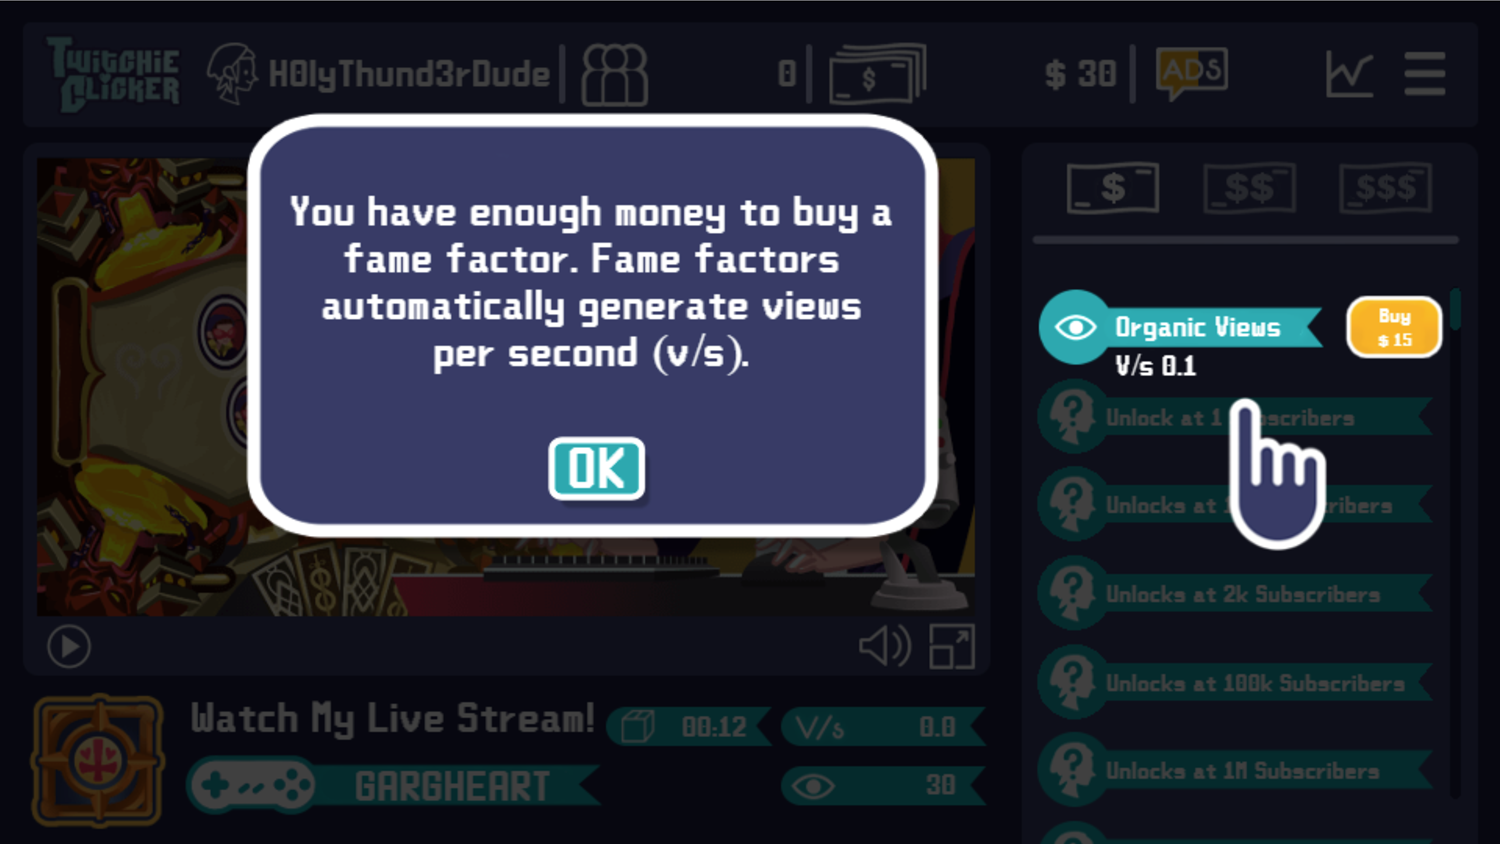 Twitchie Clicker Game Purchase Fame Factors Information Screen Screenshot.